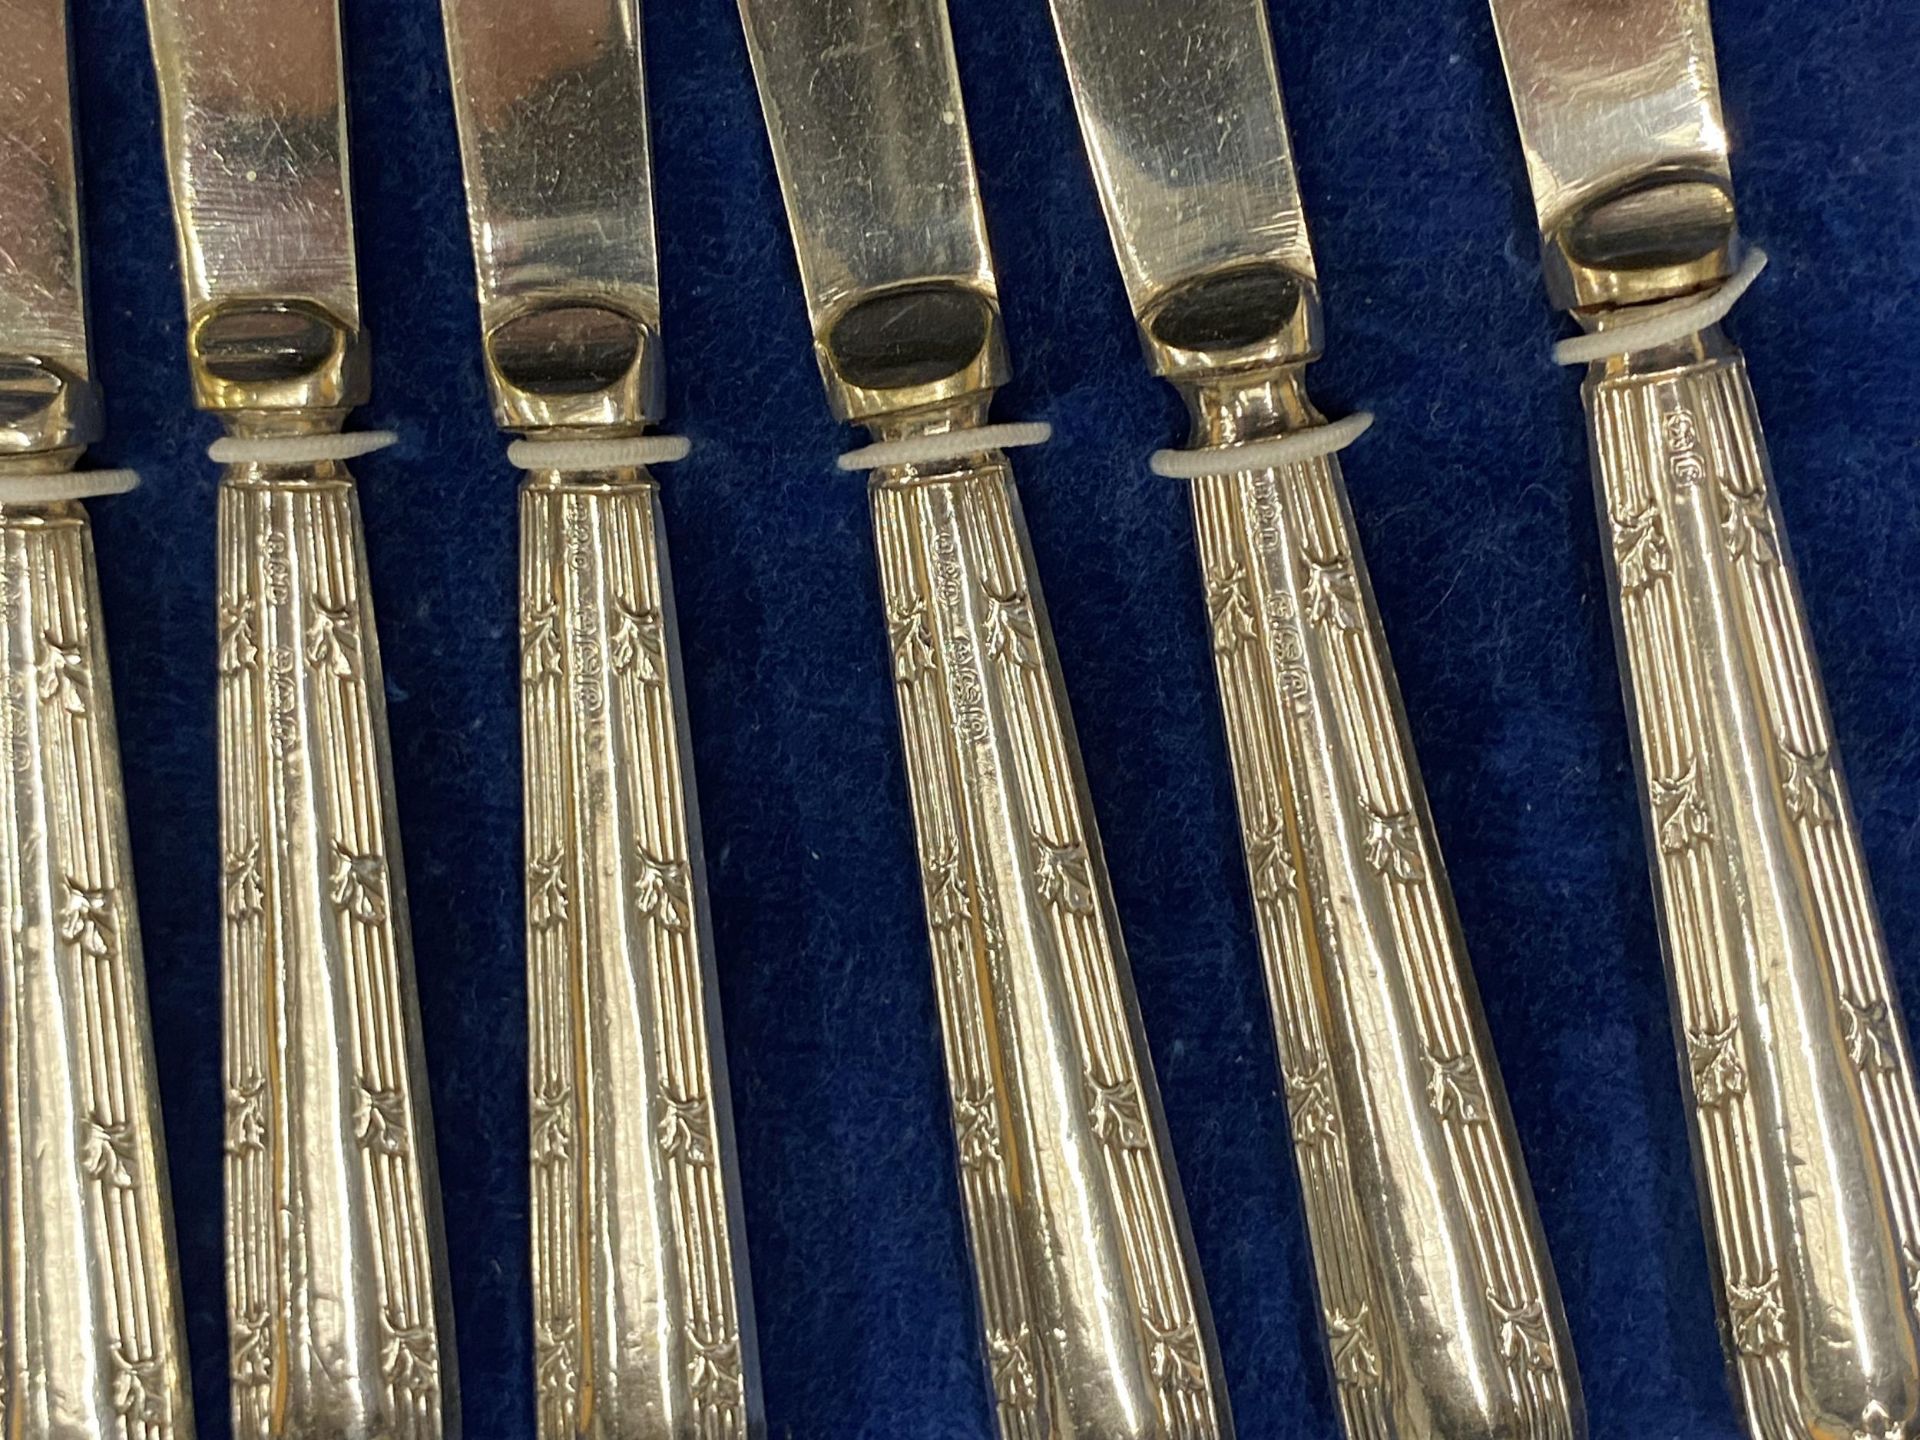 TWO BOXED SILVER ITEMS - FIVE COFFEE SPOONS AND SIX HALLMARKED SILVER HANDLED BUTTER KNIVES - Image 2 of 3